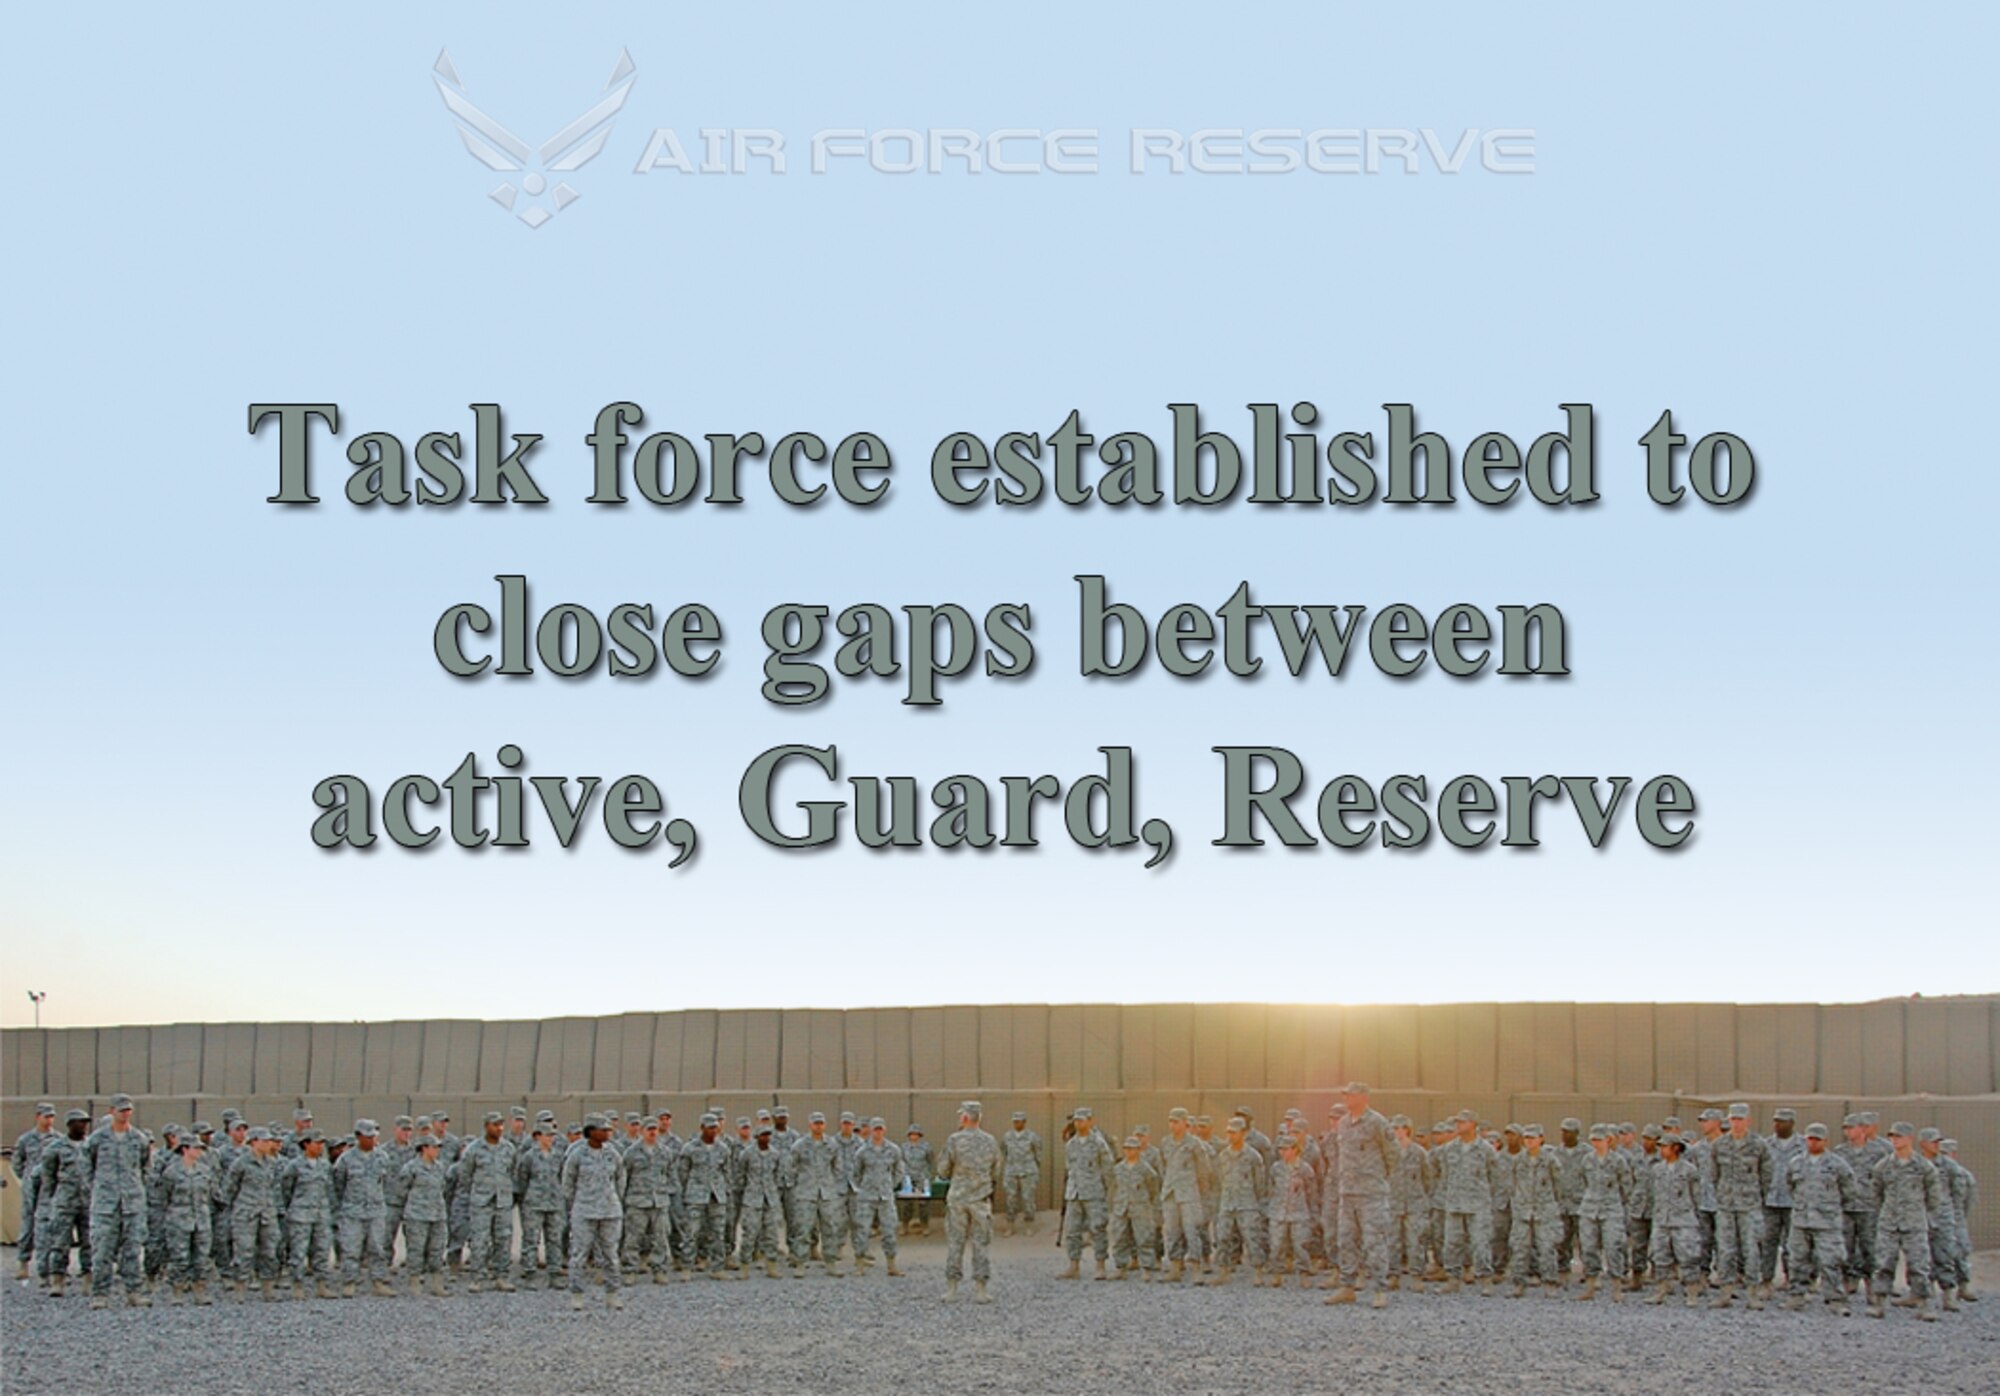 Task force established to cloase gaps between active, Guard and Reserve. (U.S. Air Force illulstration)